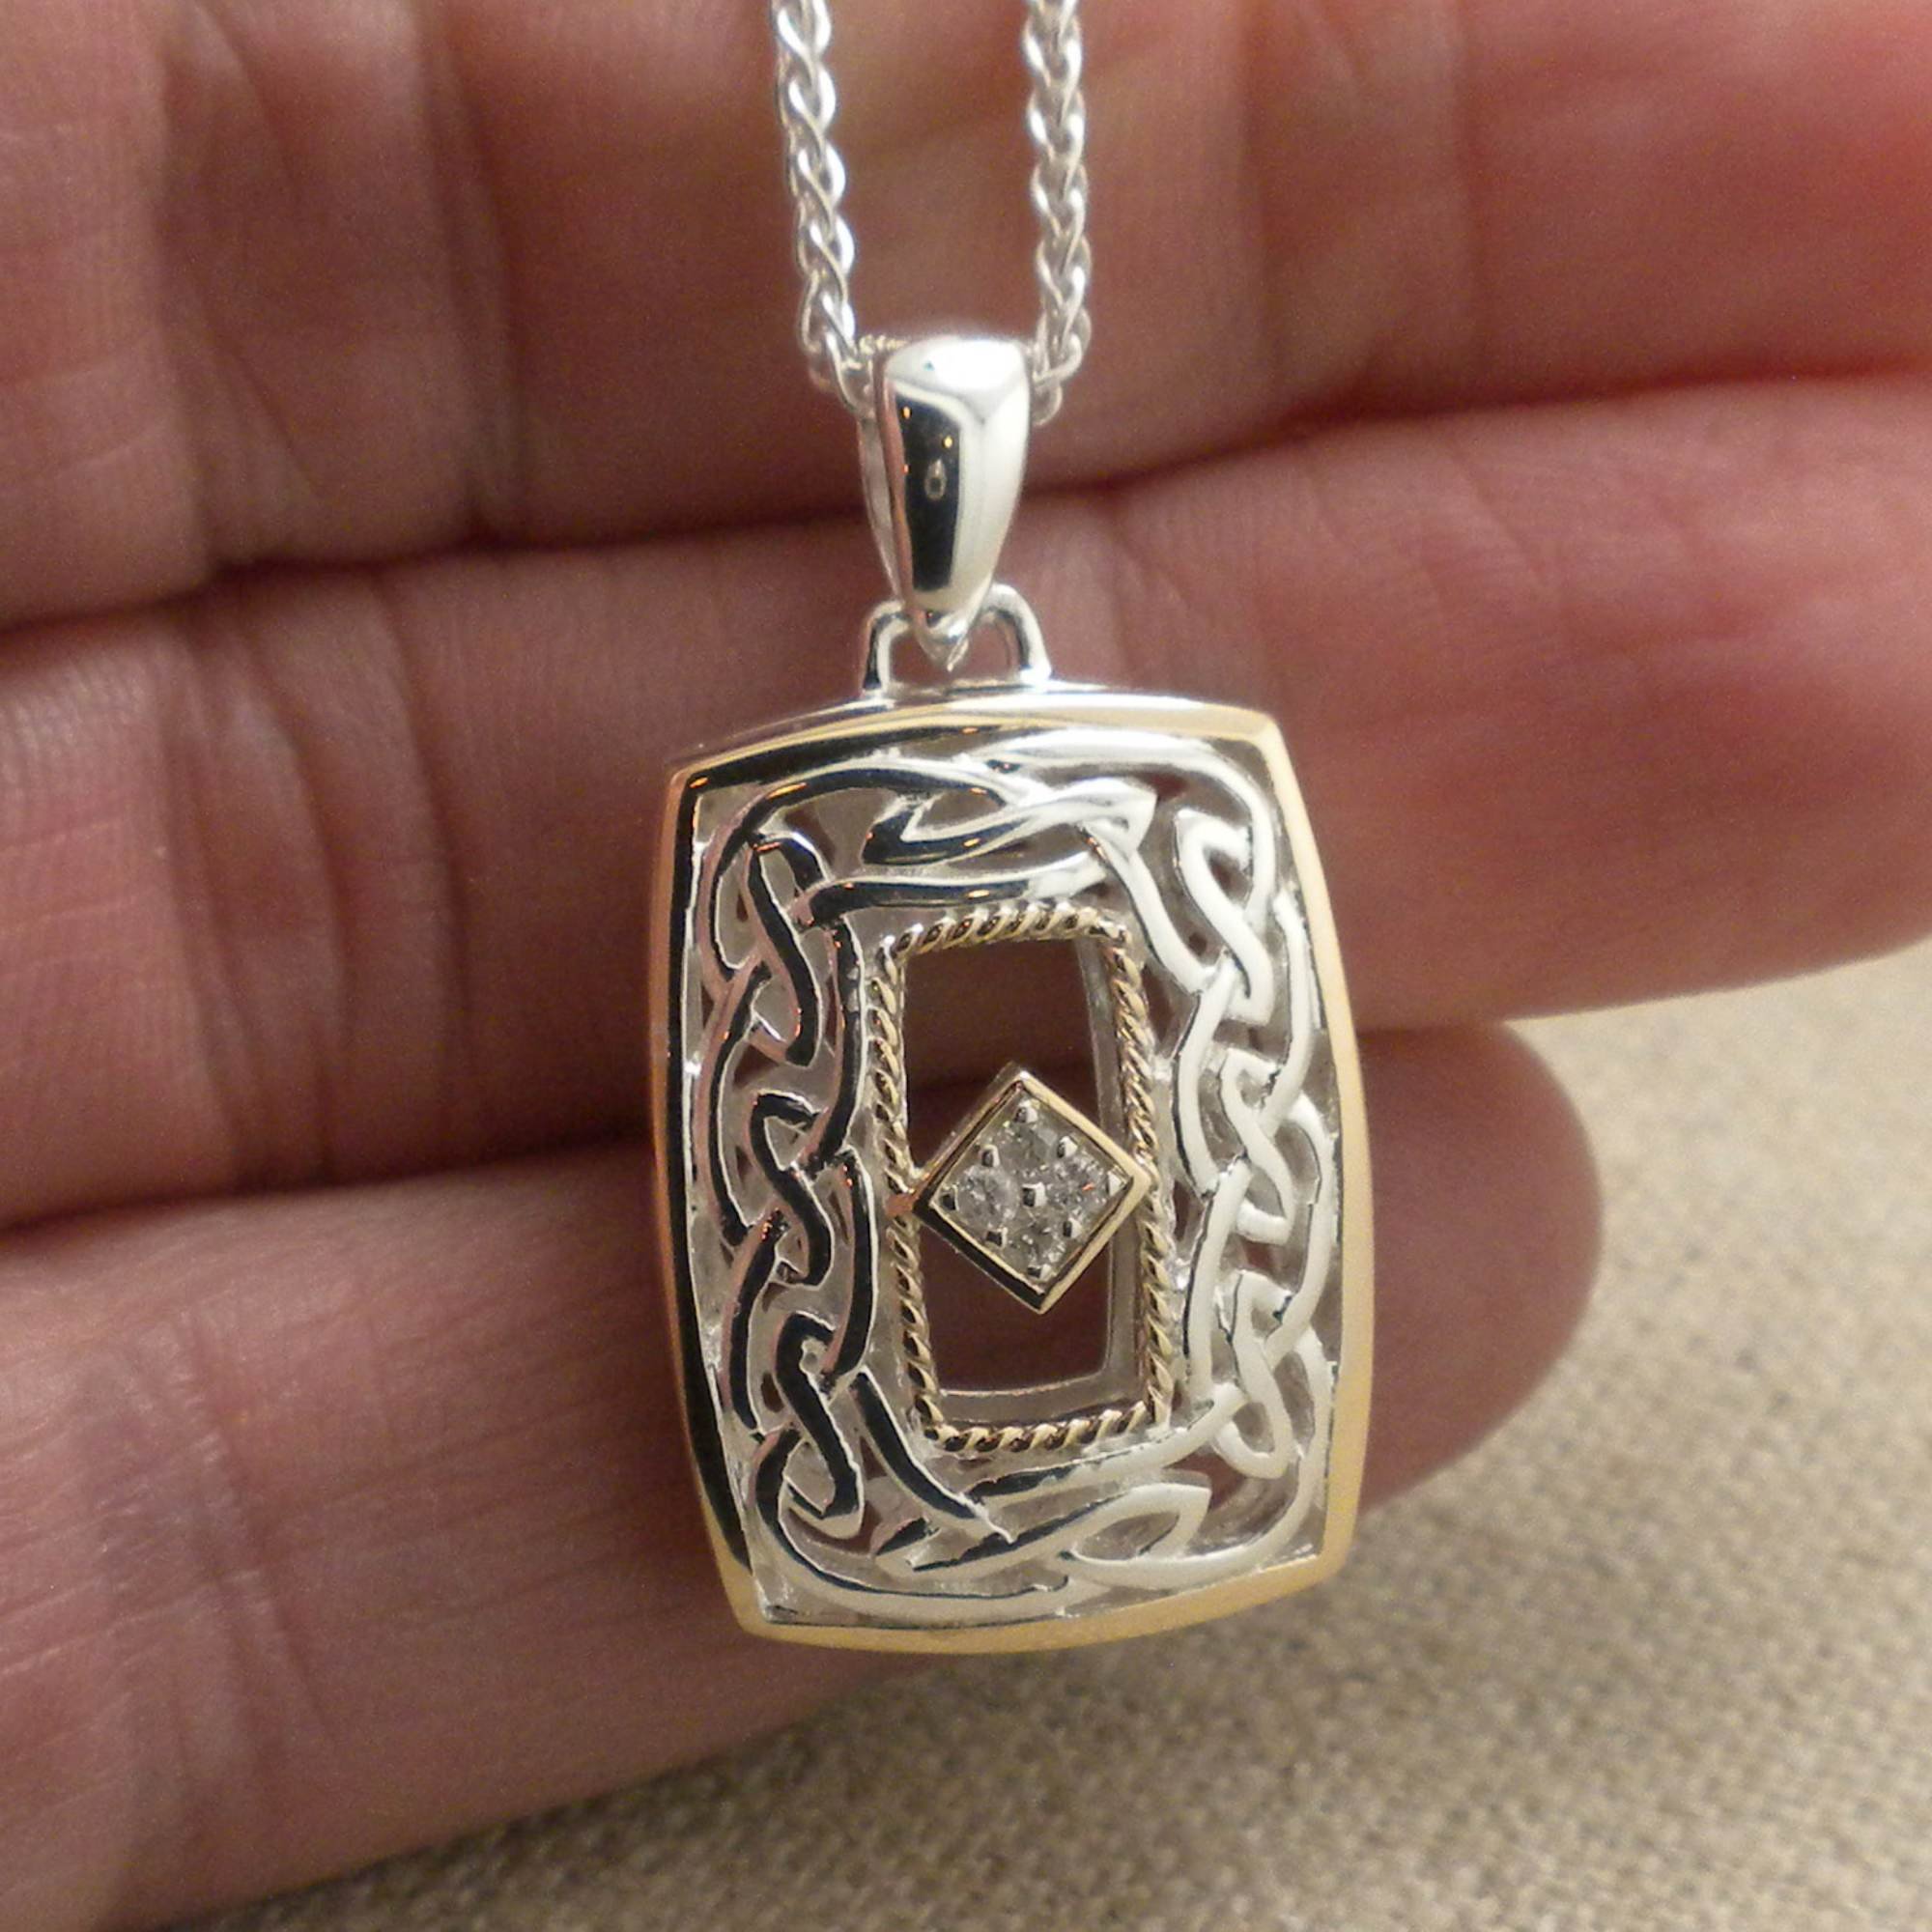 Window to the Soul Pendant